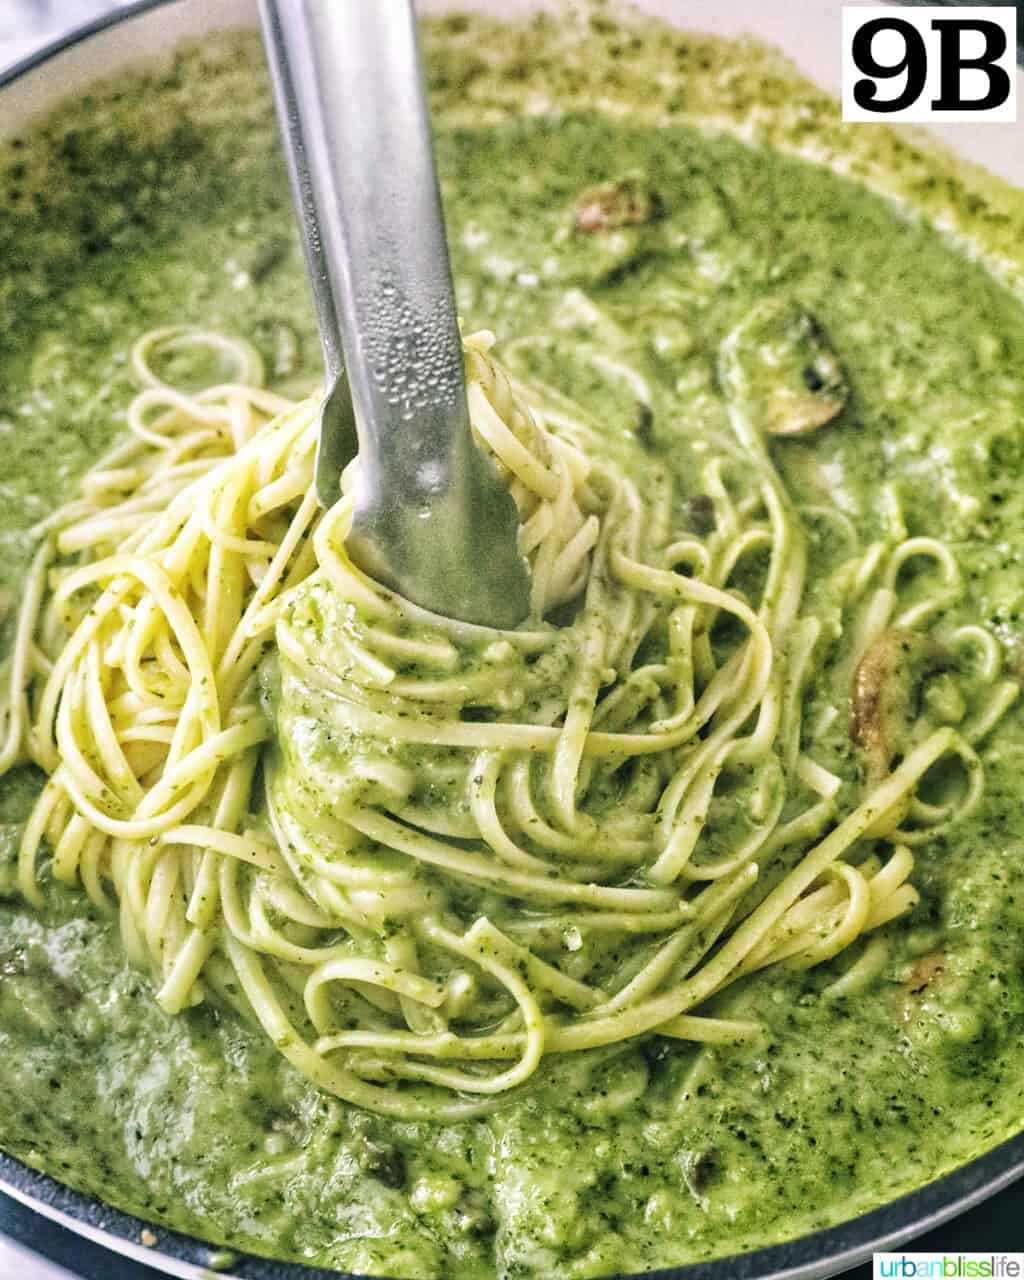 kitchen tongs twirling linguine pasta in pesto sauce with chopped mushrooms.